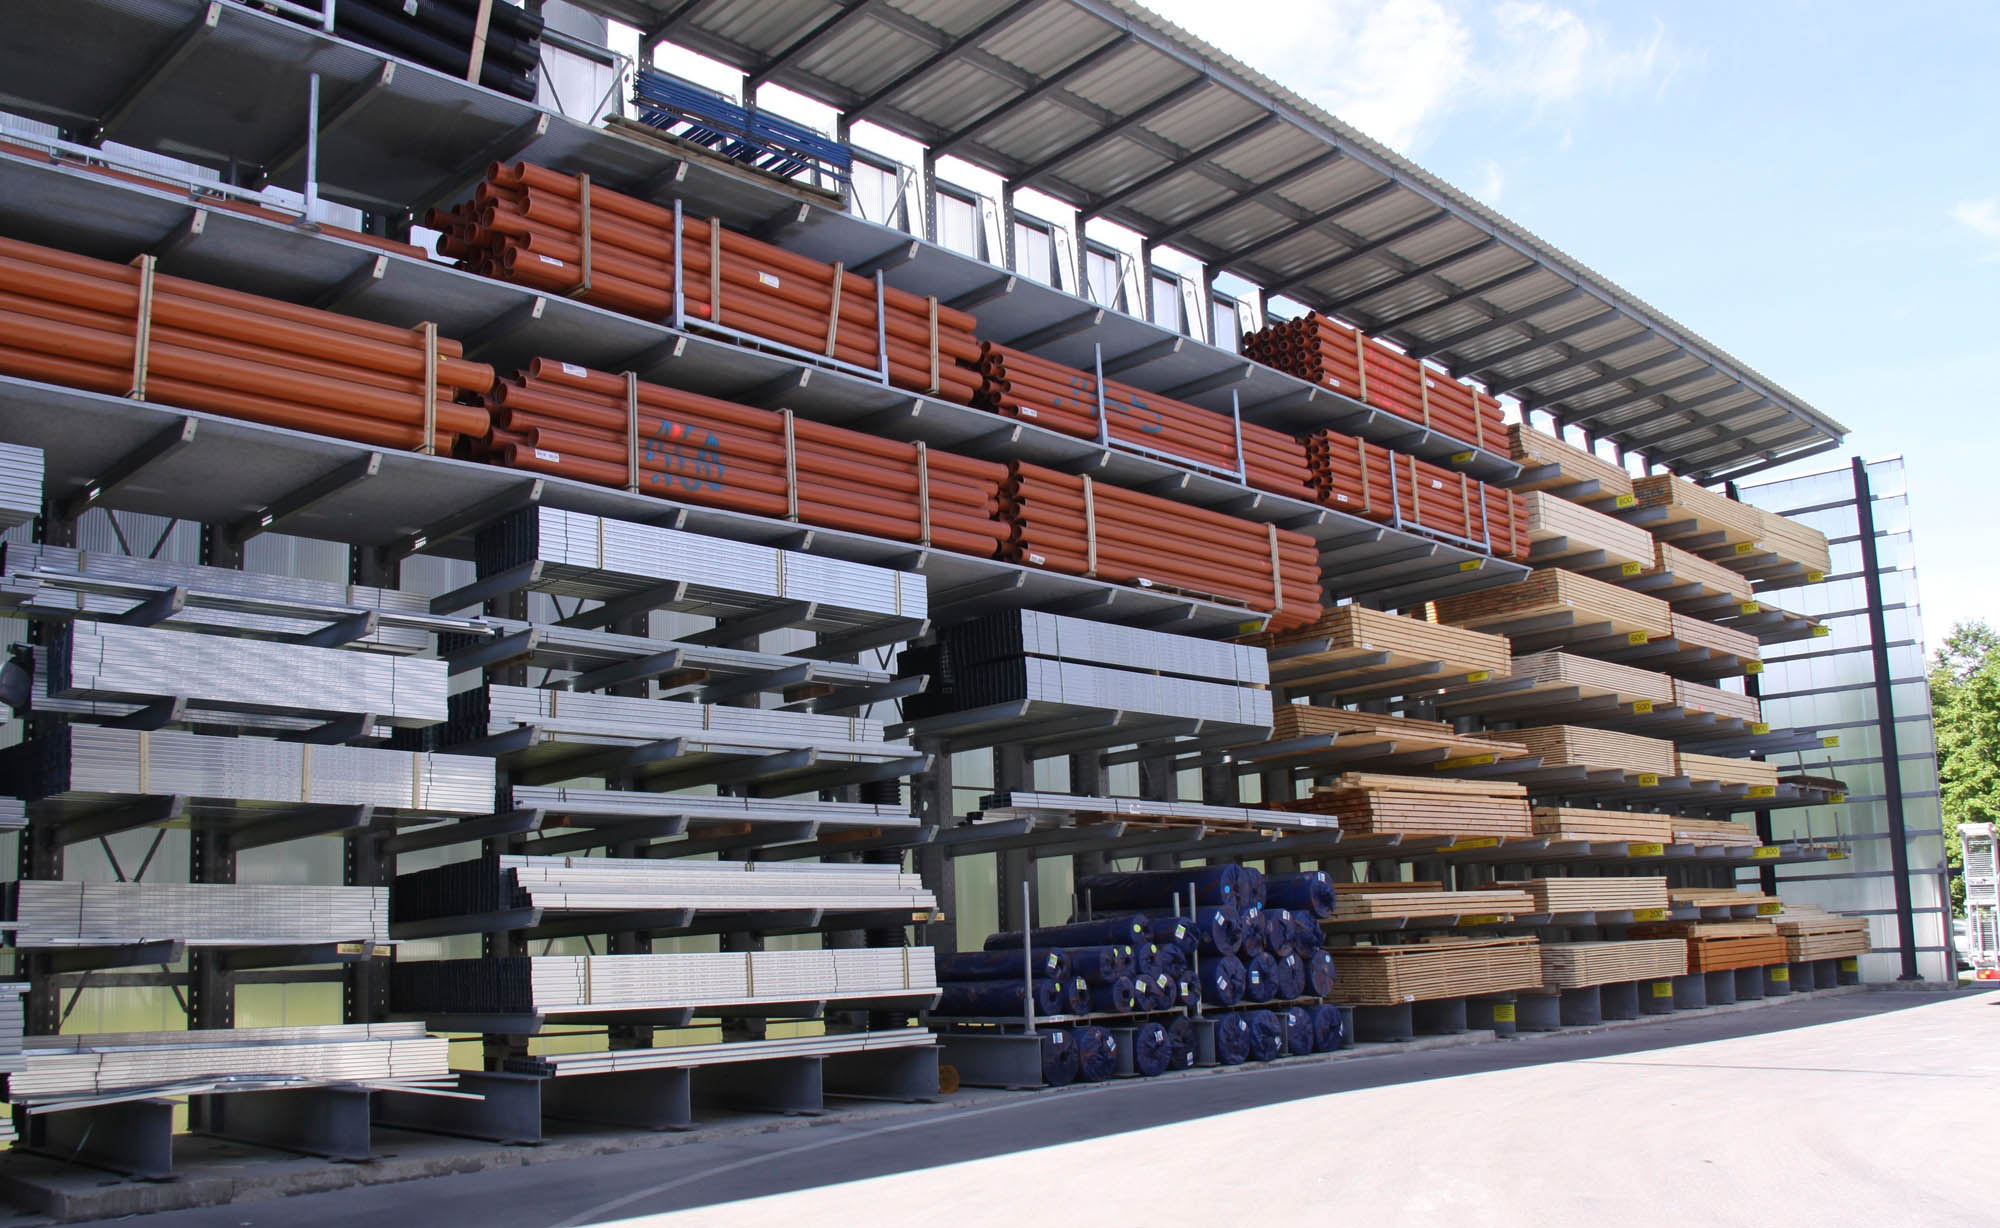 Cantilever racking for building materials